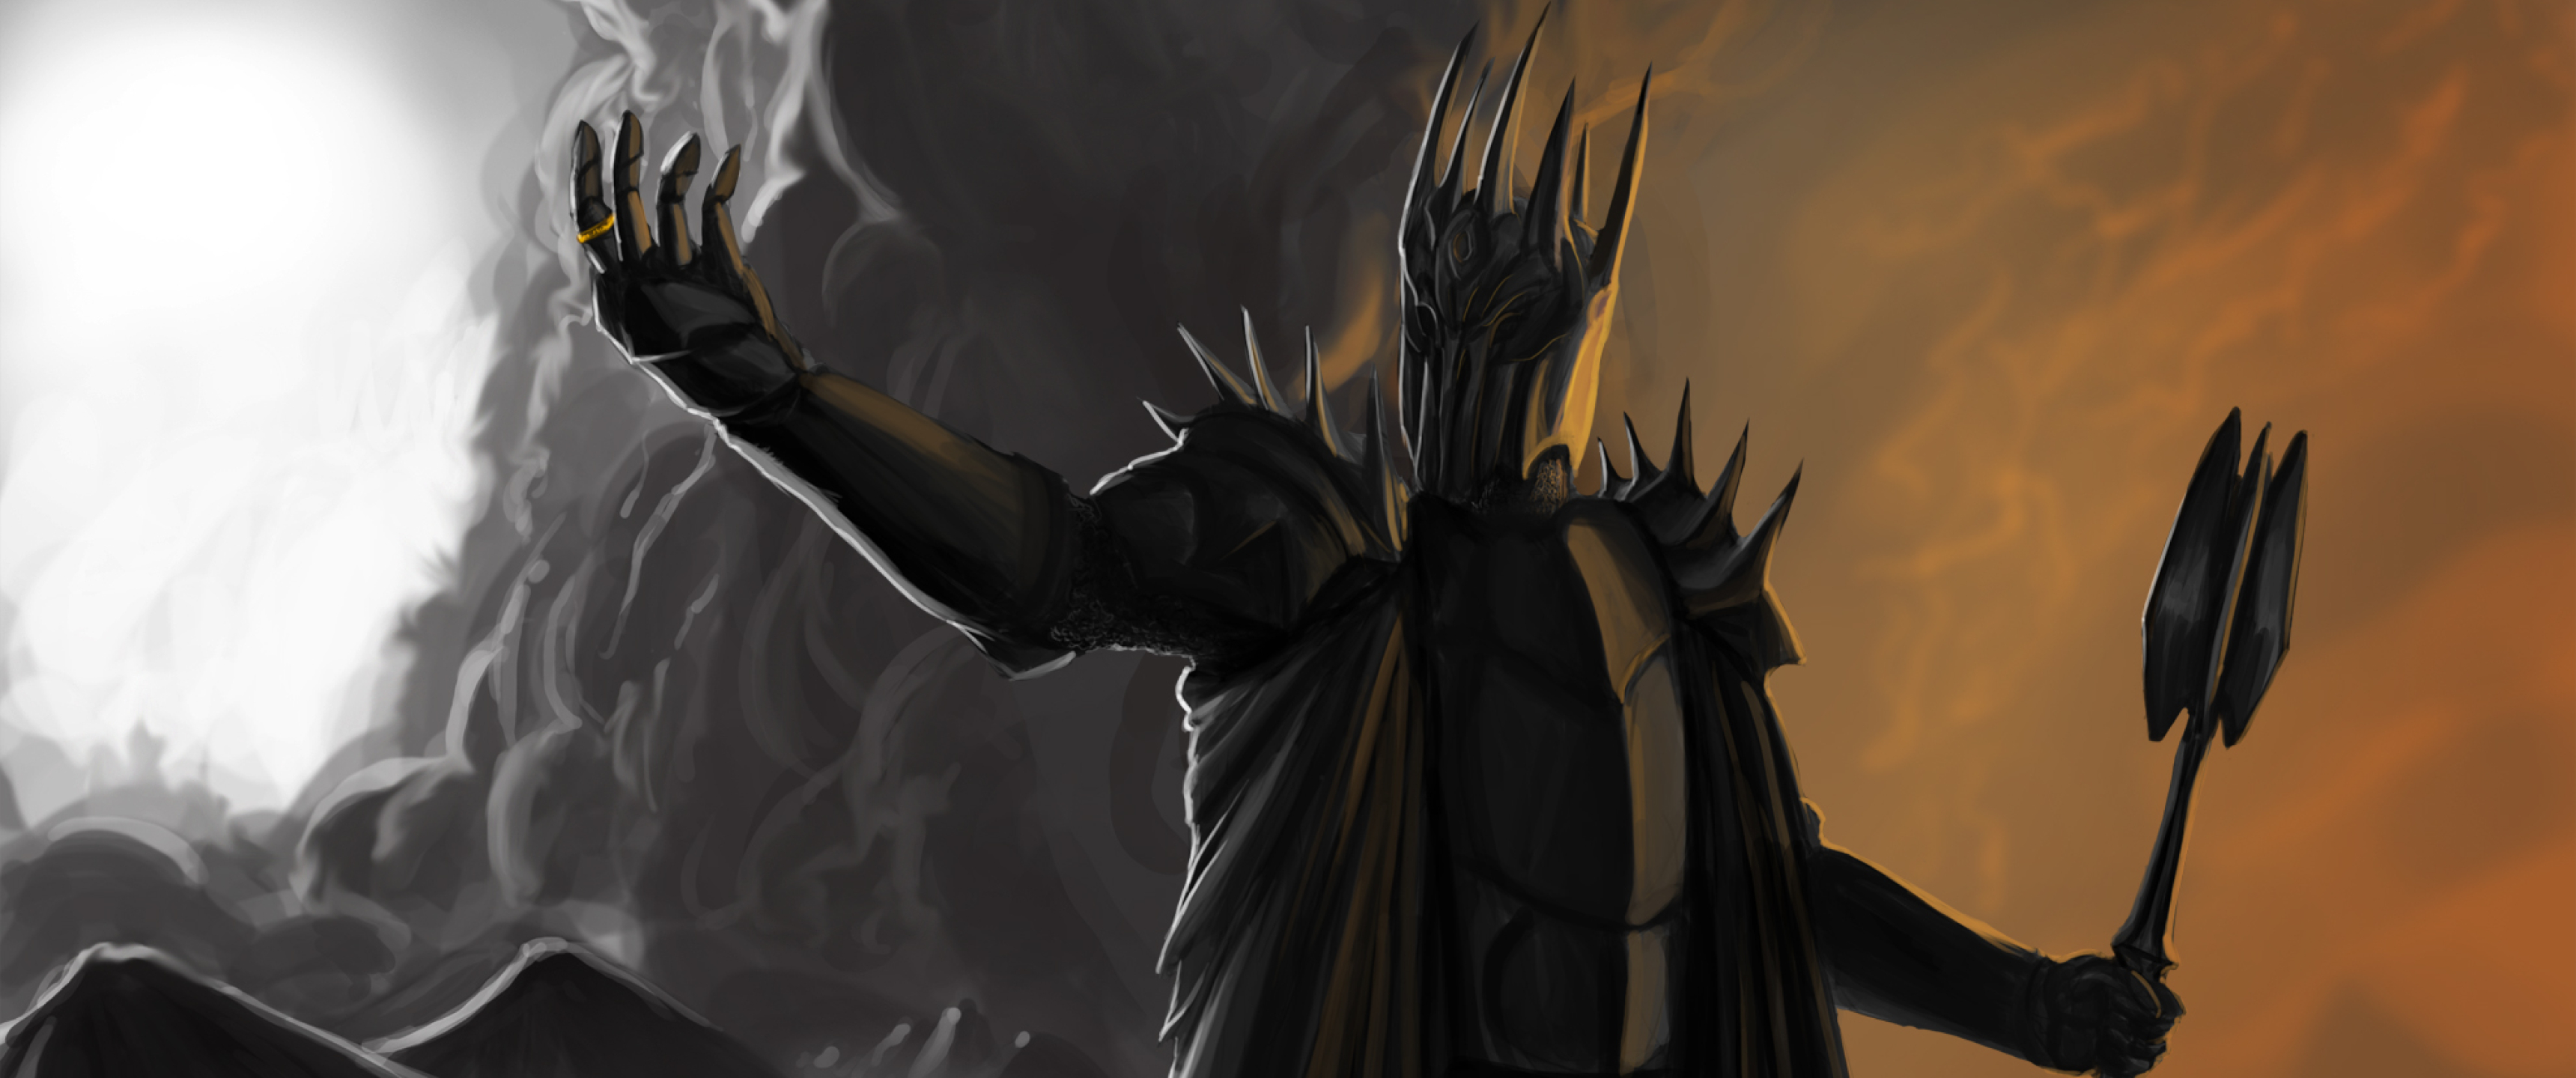 3440x1440 Resolution Sauron Lord Of The Rings 3440x1440 Resolution